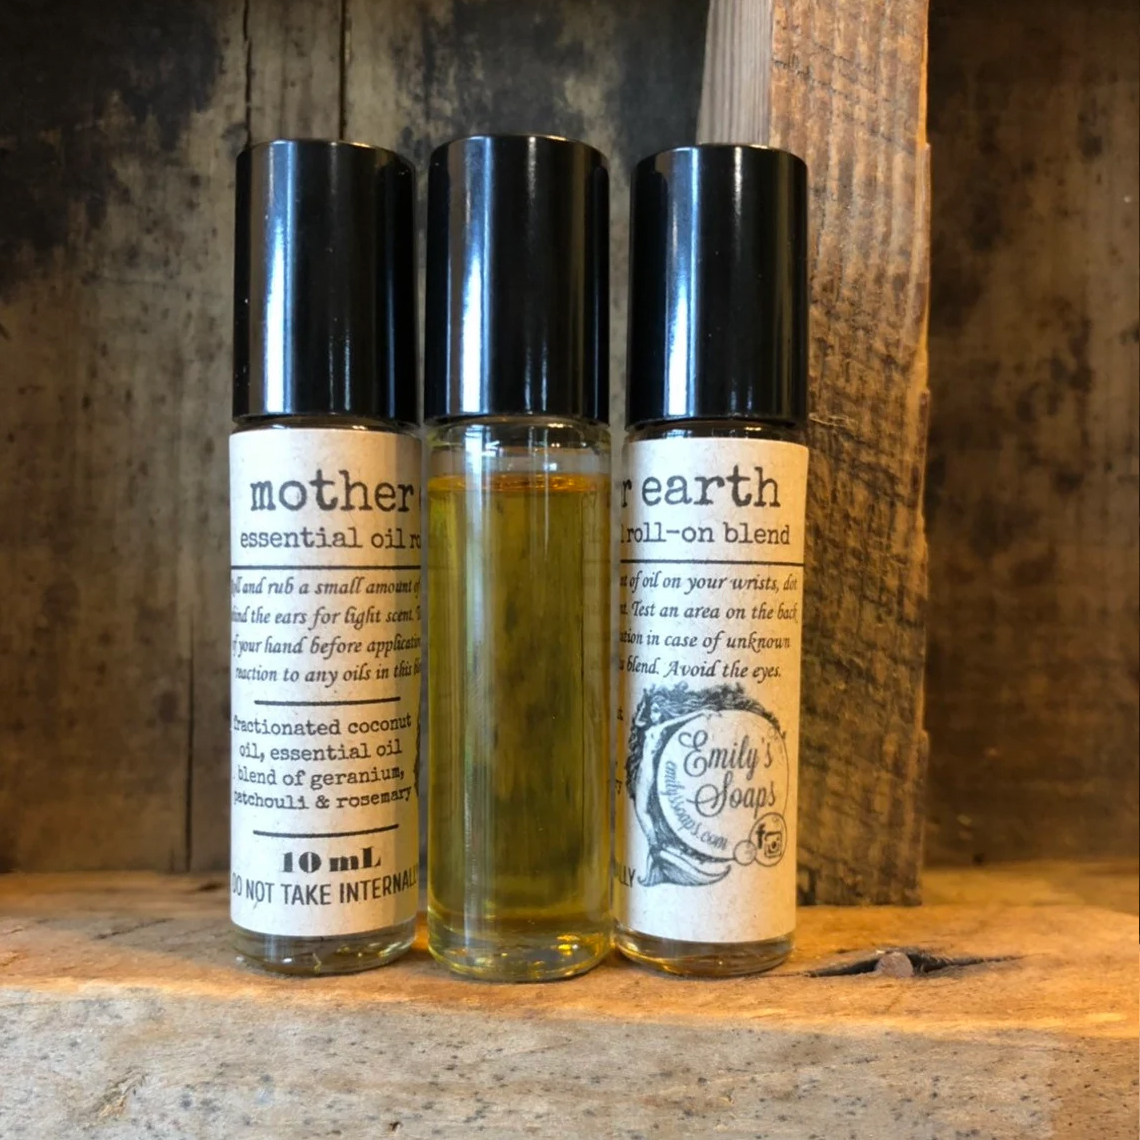 Emilys Soaps Essential Oil Roll On Mother Earth